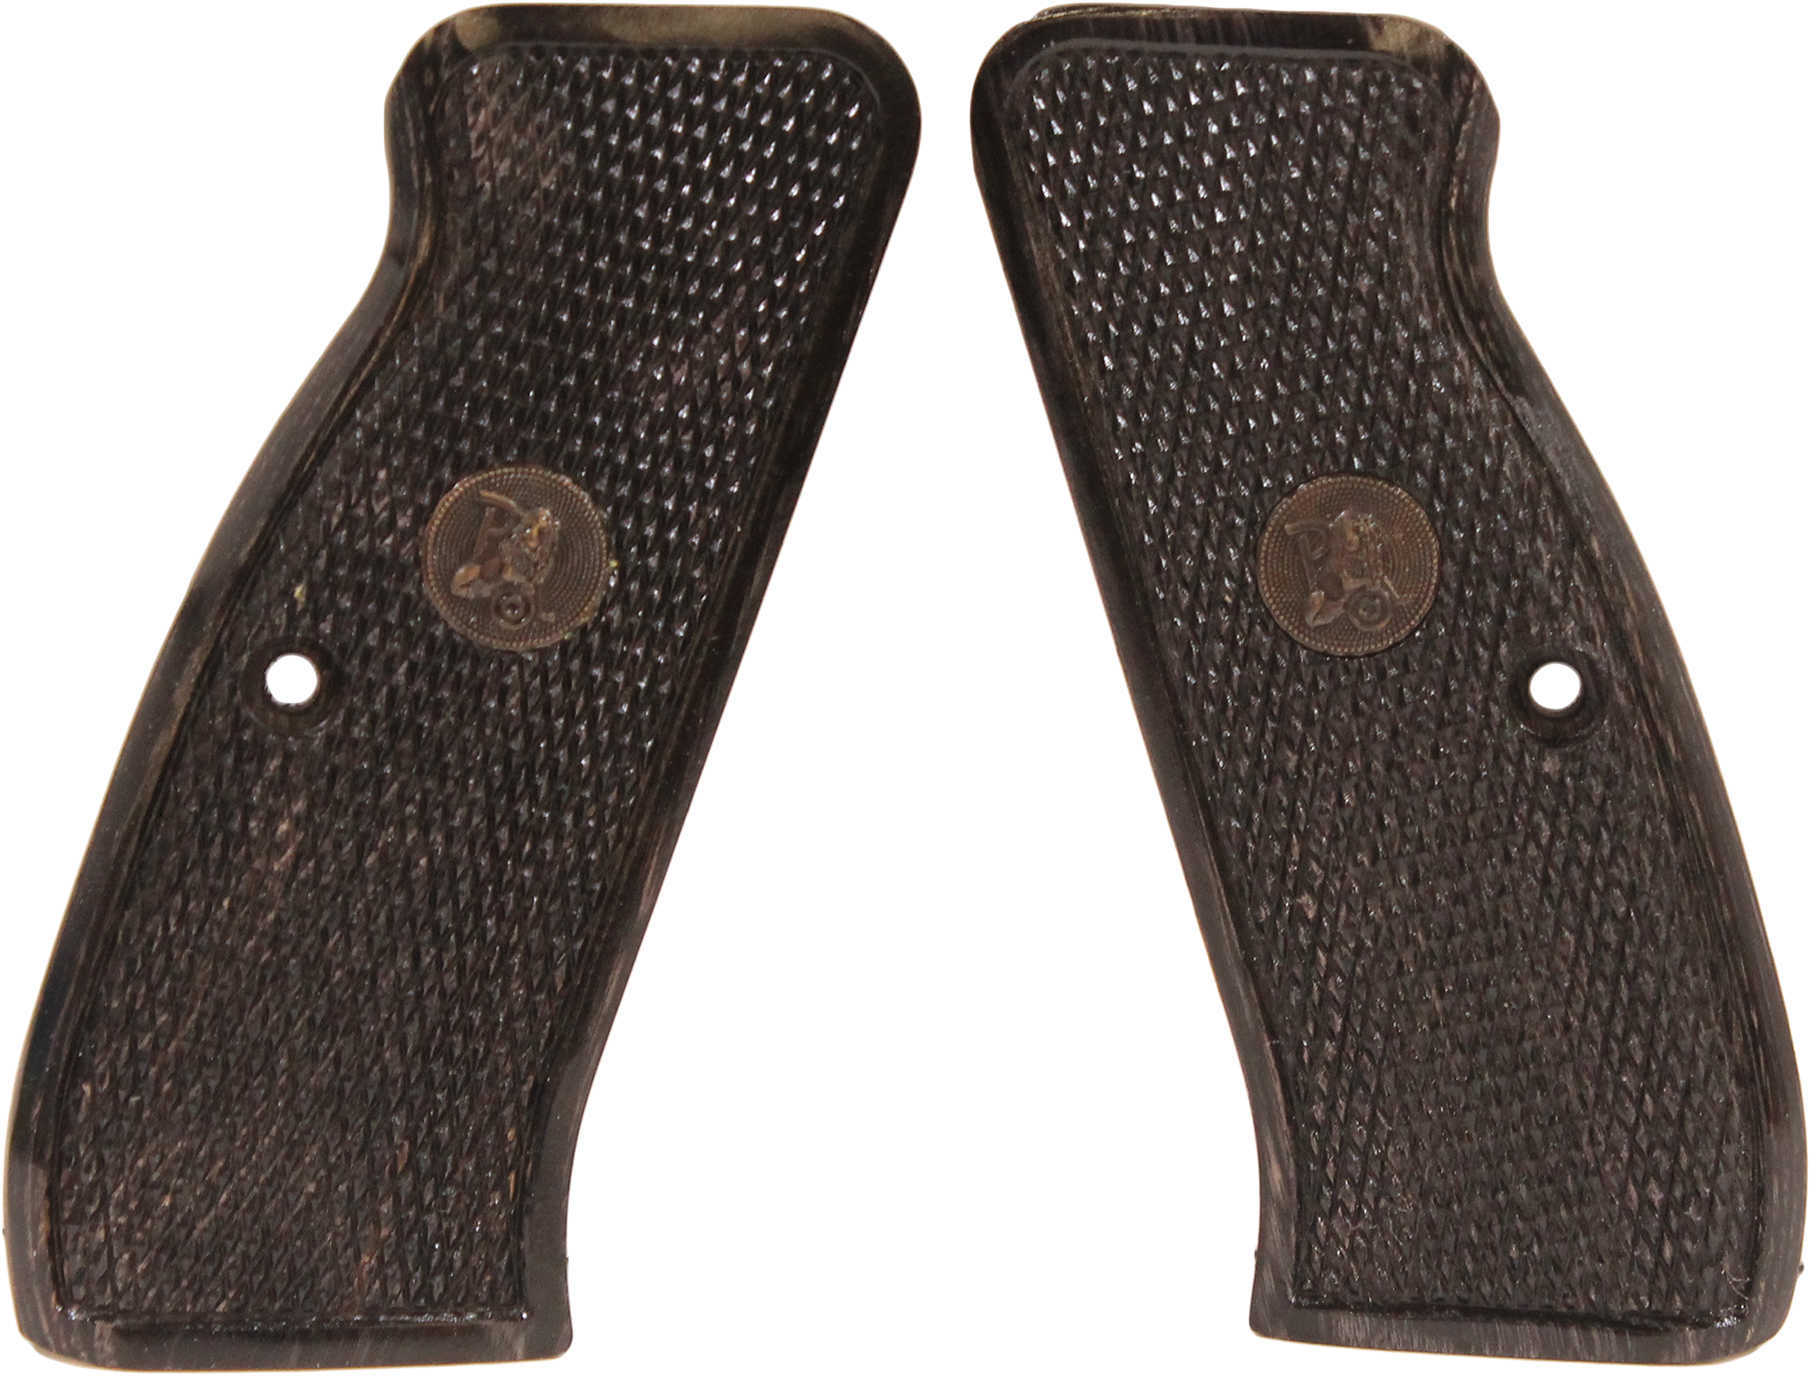 Pachmayr Laminated Wood Grips CZ 75/85 Black/Gray Checkered